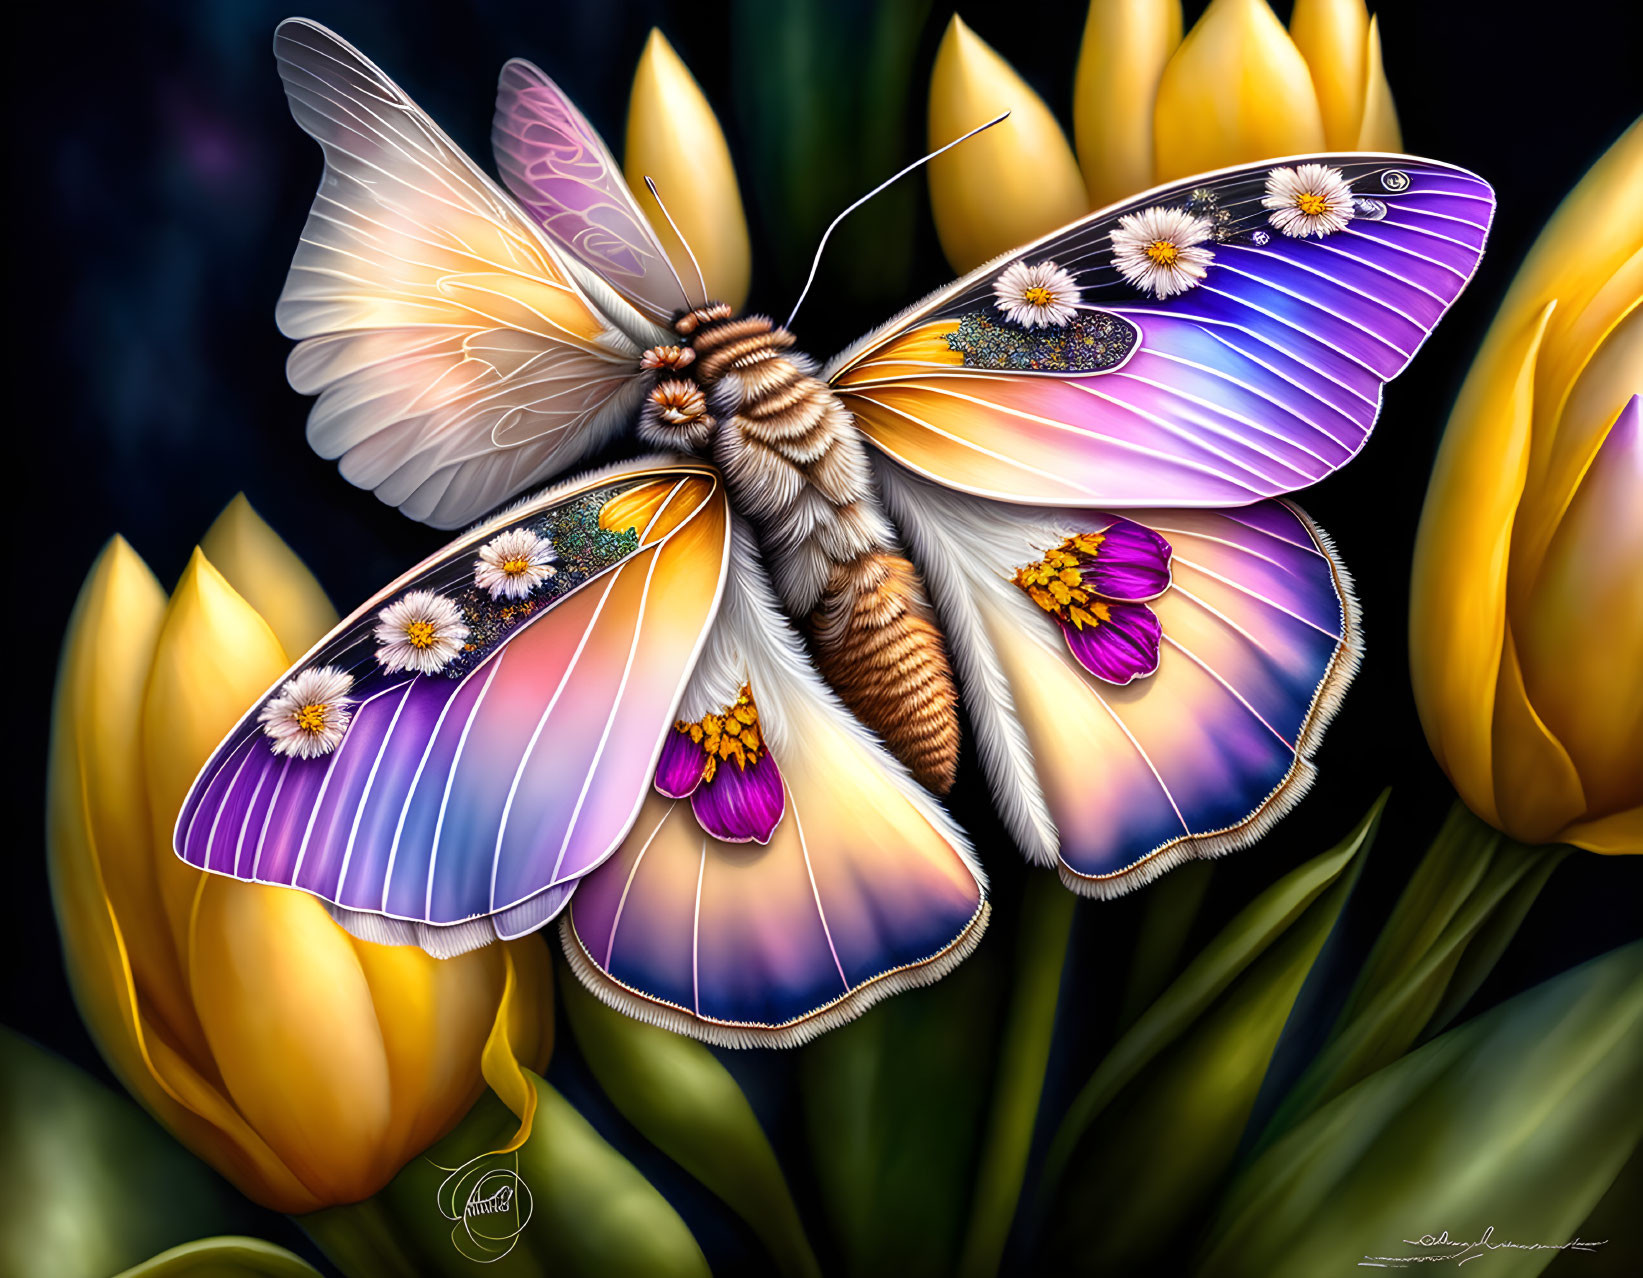 Colorful Butterfly Artwork with Floral and Starry Details on Dark Background